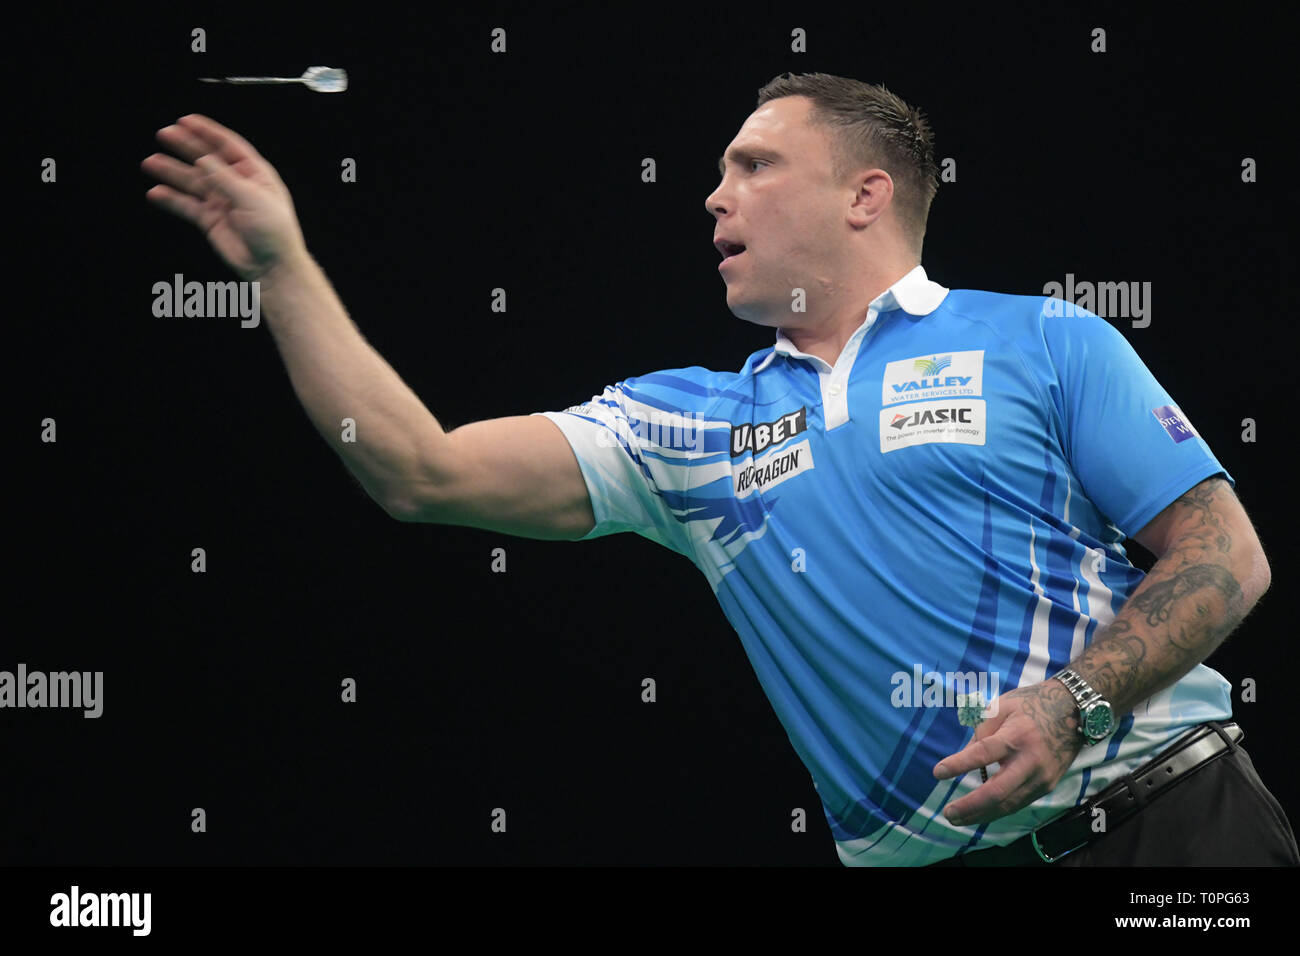 March 2019, Berlin: Welsh professional Gerwyn Price is in action at the Premier League in the sold-out arena at Ostbahnhof. Photo: Jörg Carstensen/dpa Stock Photo - Alamy